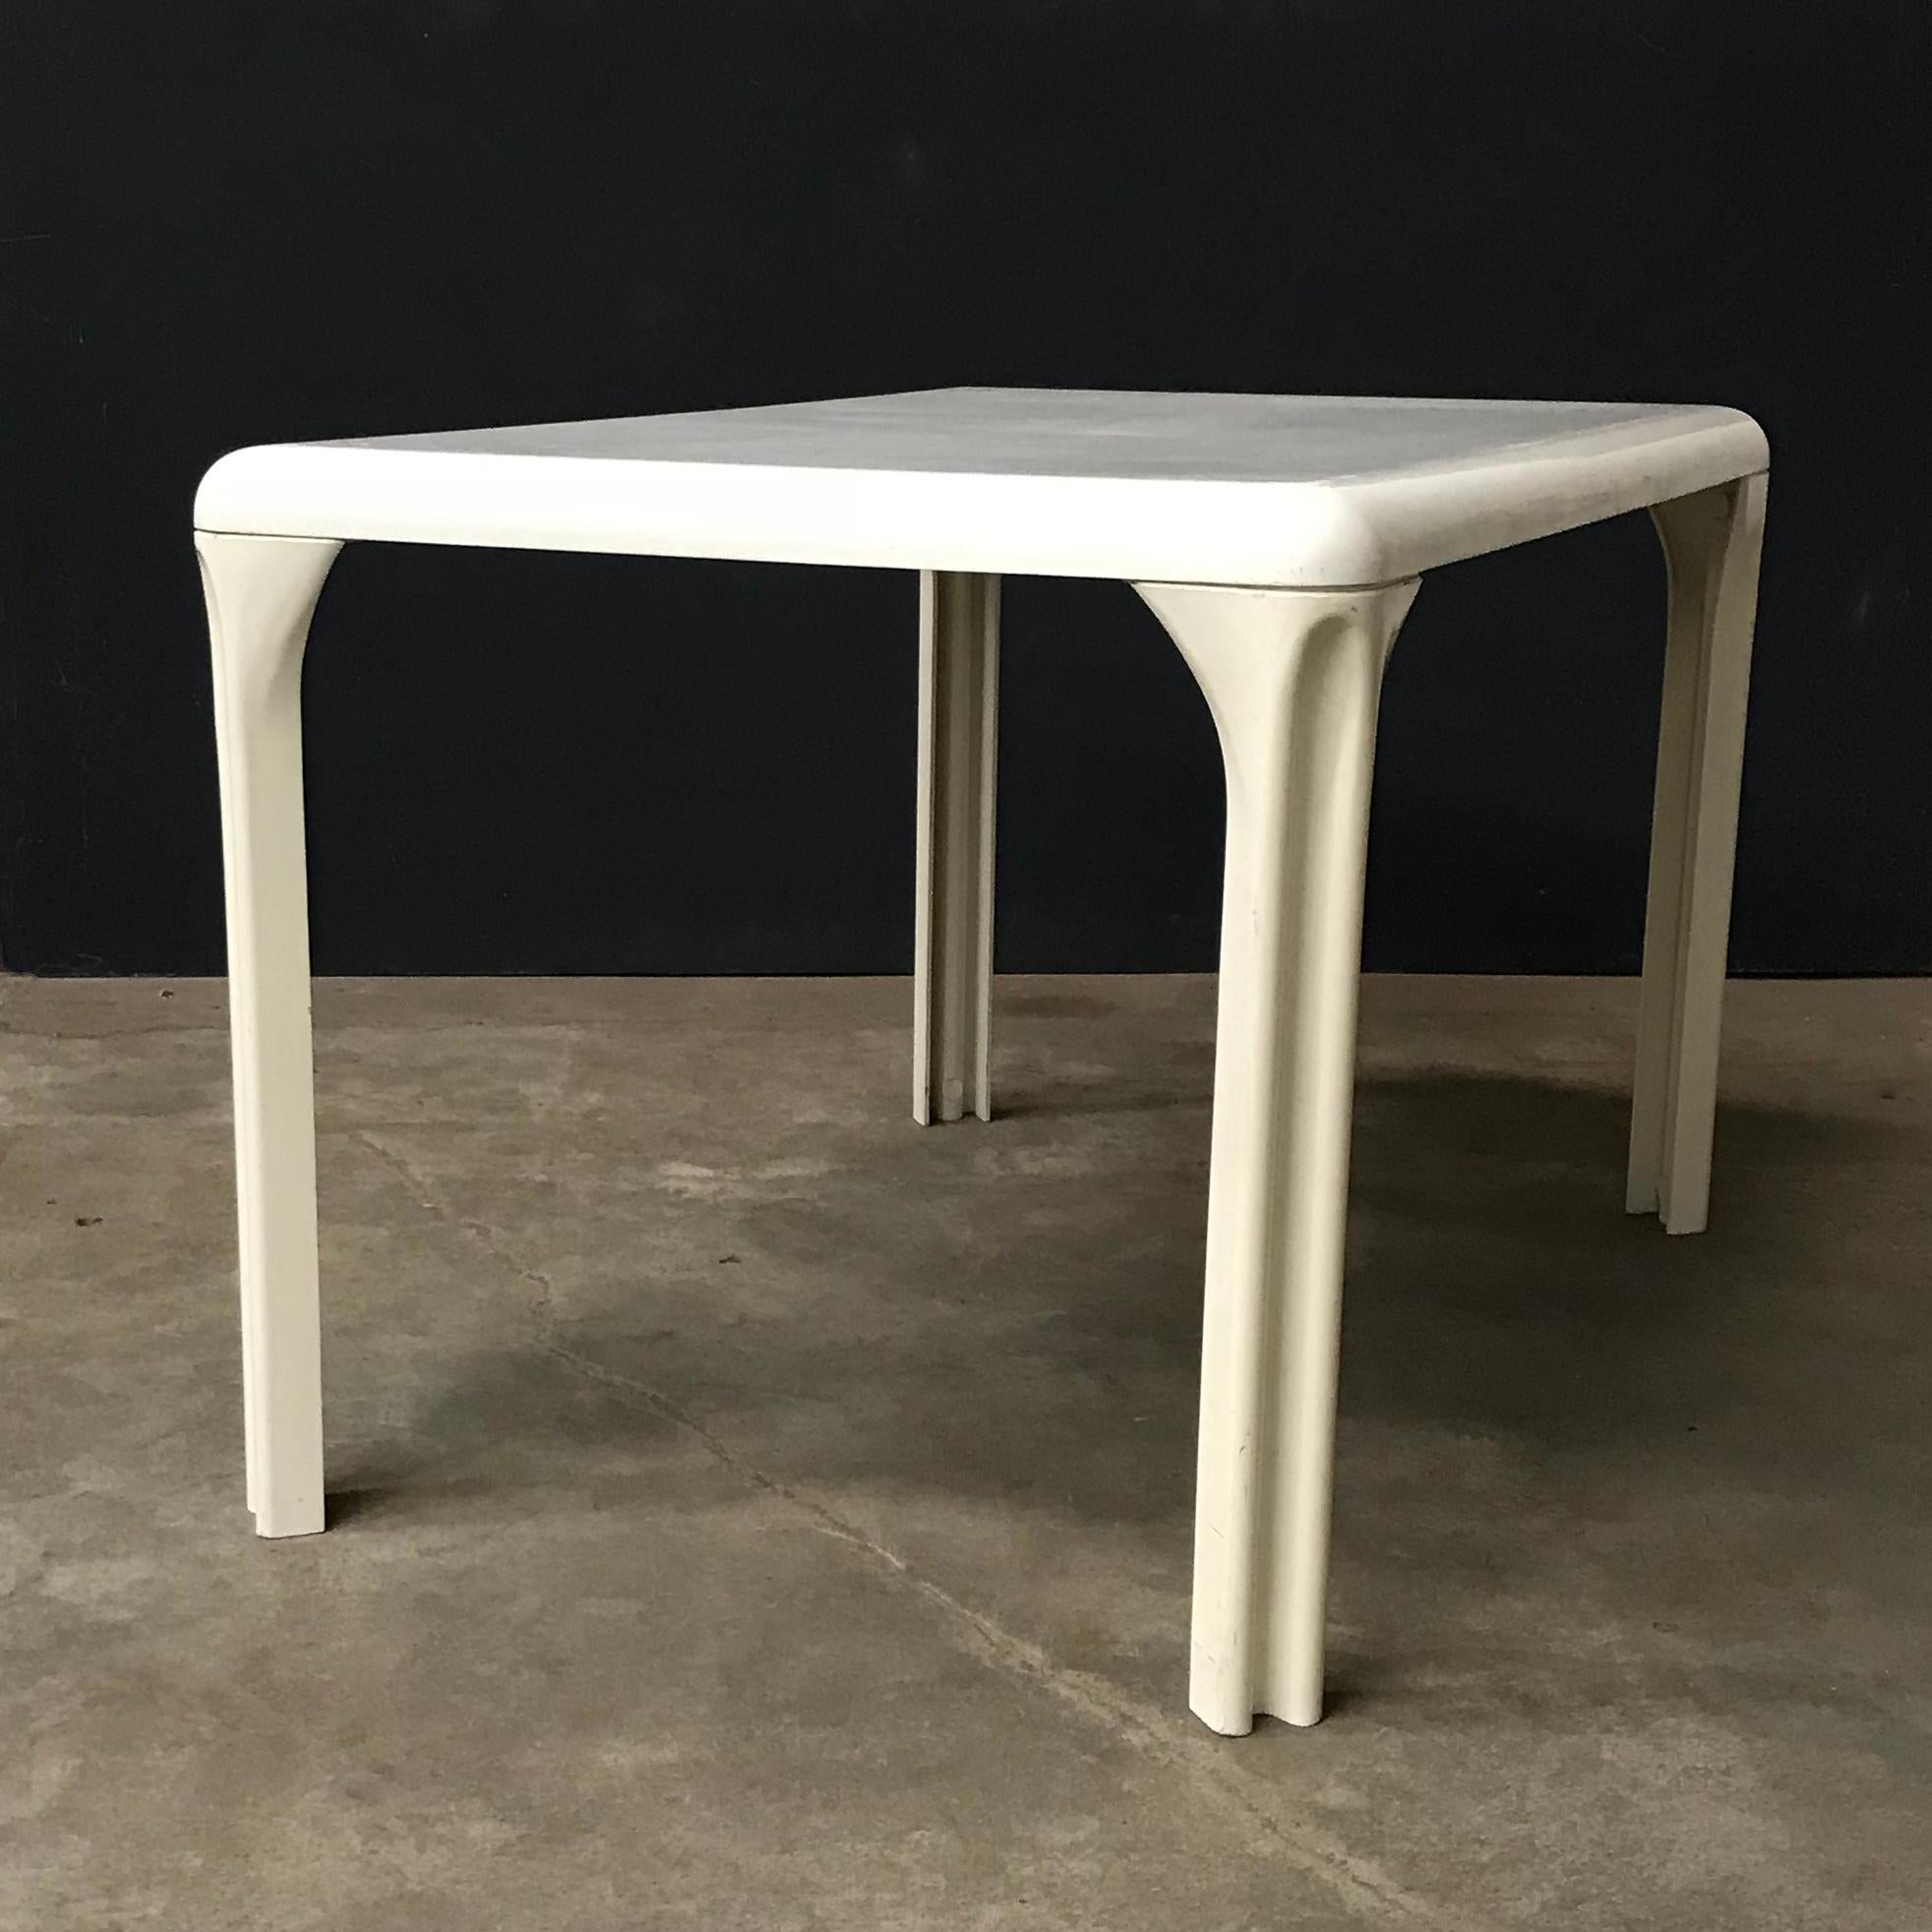 Magistretti table in white plastic. The table shows traces of wear like scratches, superficial (like picture #9 - #12 ) and deeper (#13 and #14) , spots and some loss of color/coating. The table top and legs show some change of color over the years.